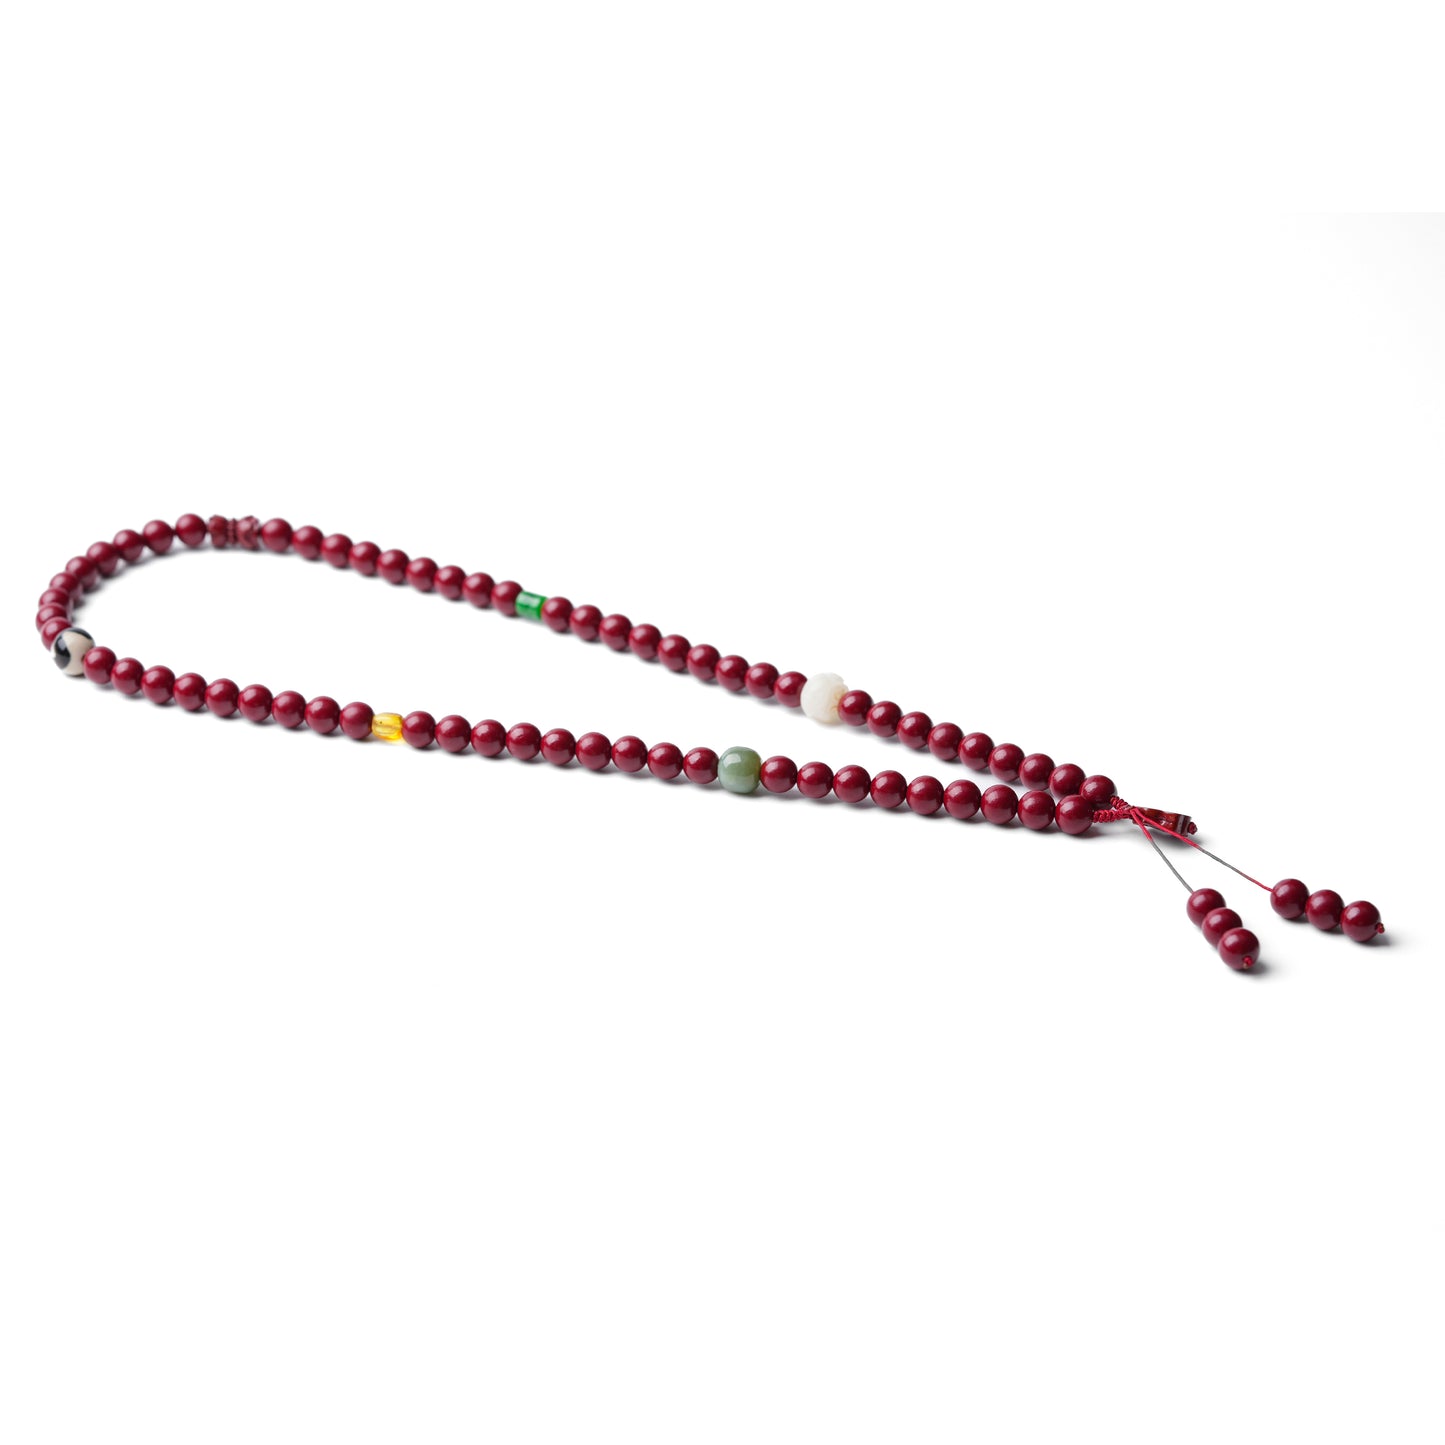 Cleansing and Protection - Amber Charmed Cinnabar Beads